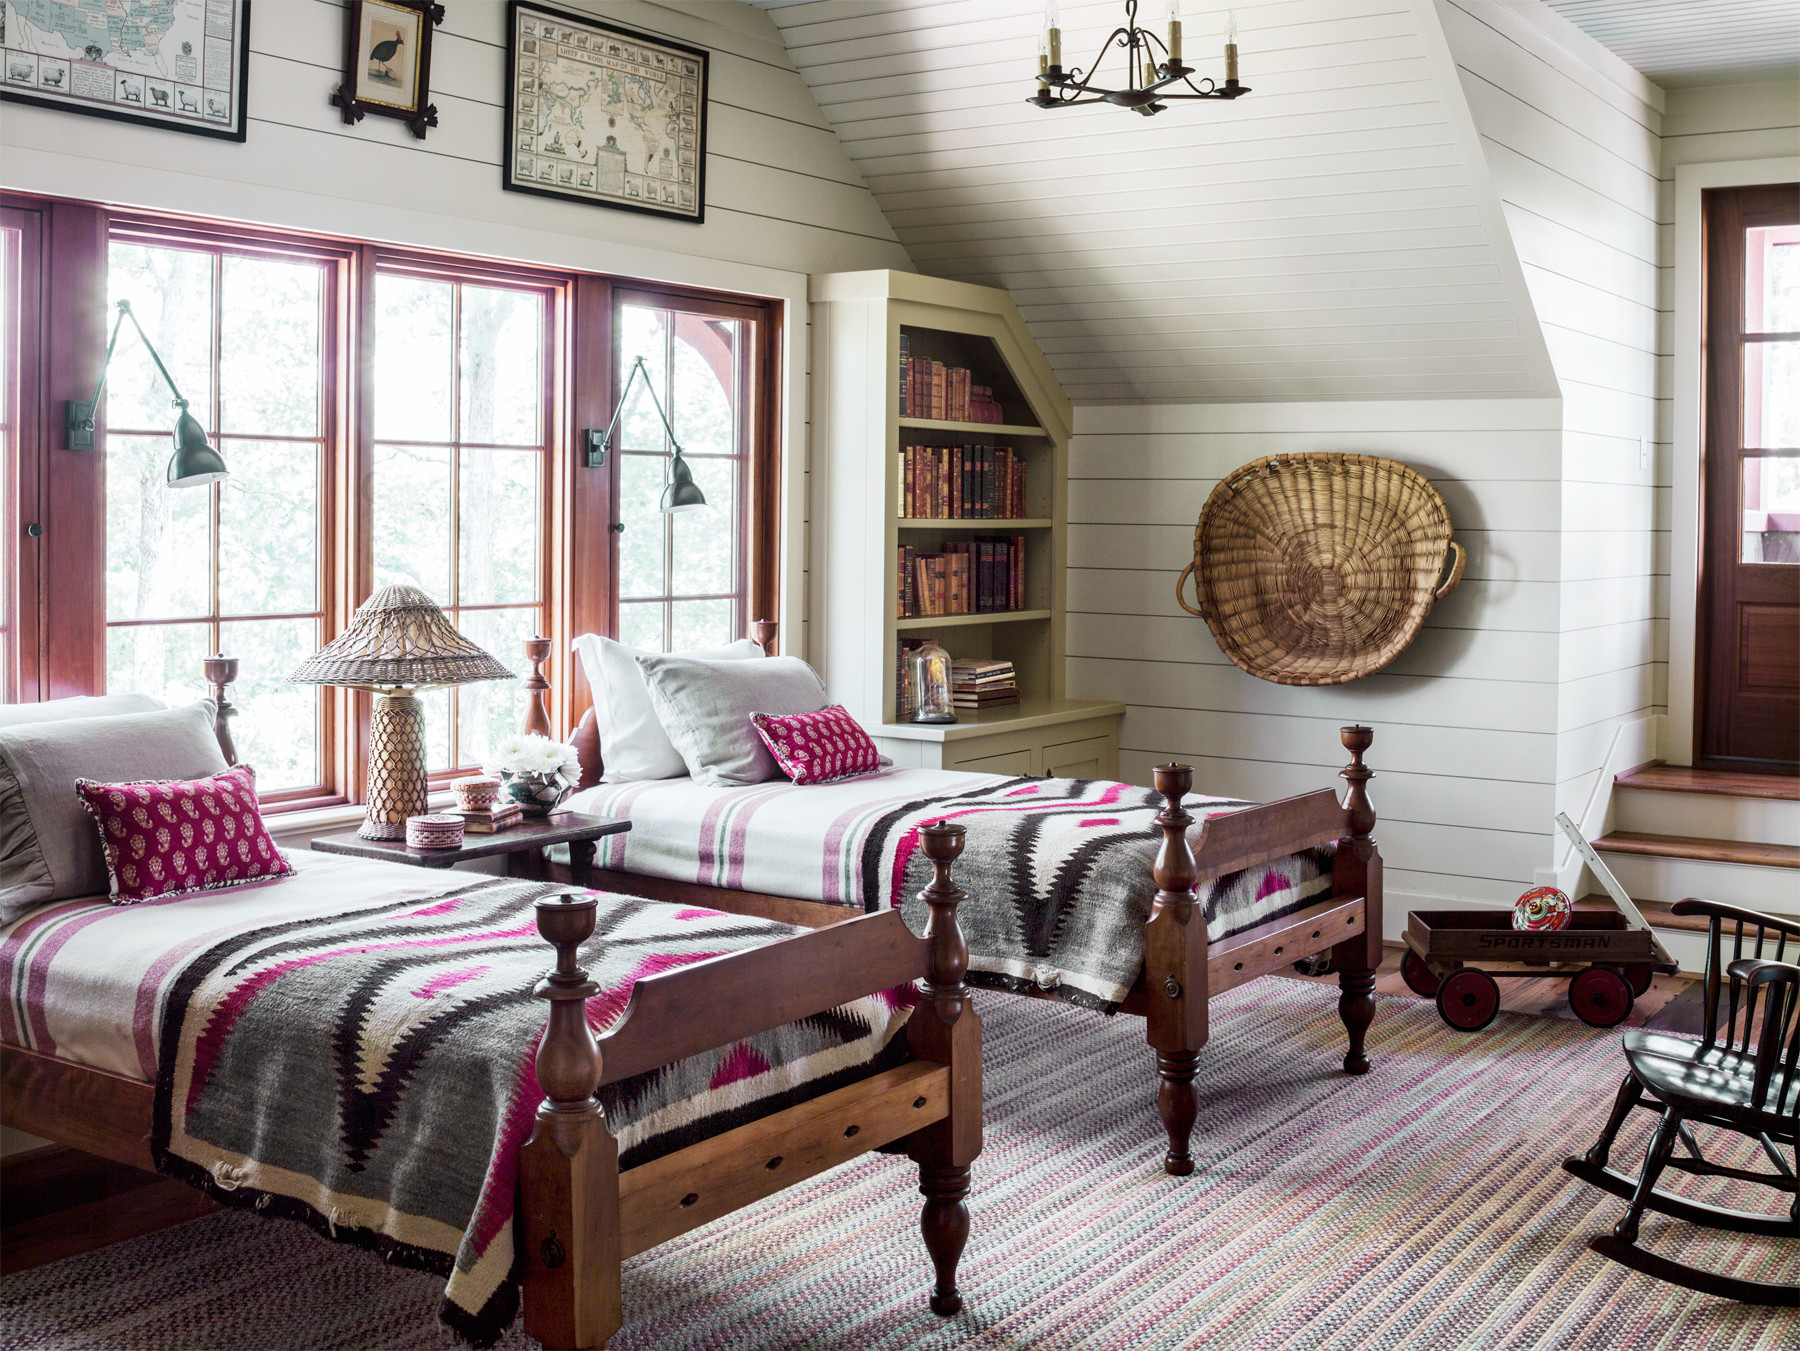 Lake House Decorating Ideas Bedroom
 South Carolina Lake House Cabin Rustic and Timeless